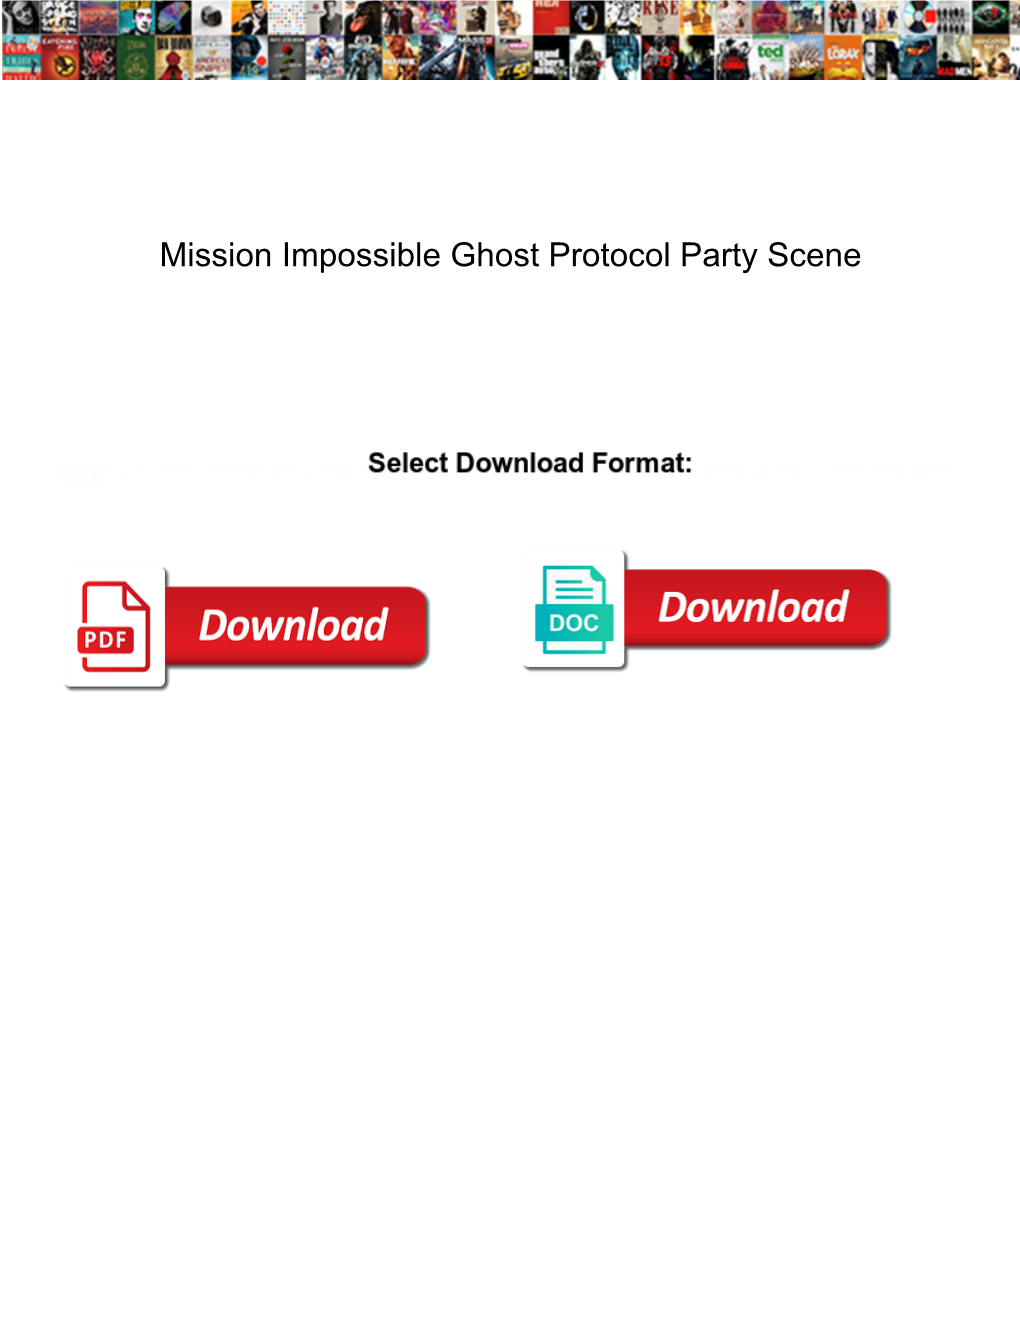 Mission Impossible Ghost Protocol Party Scene